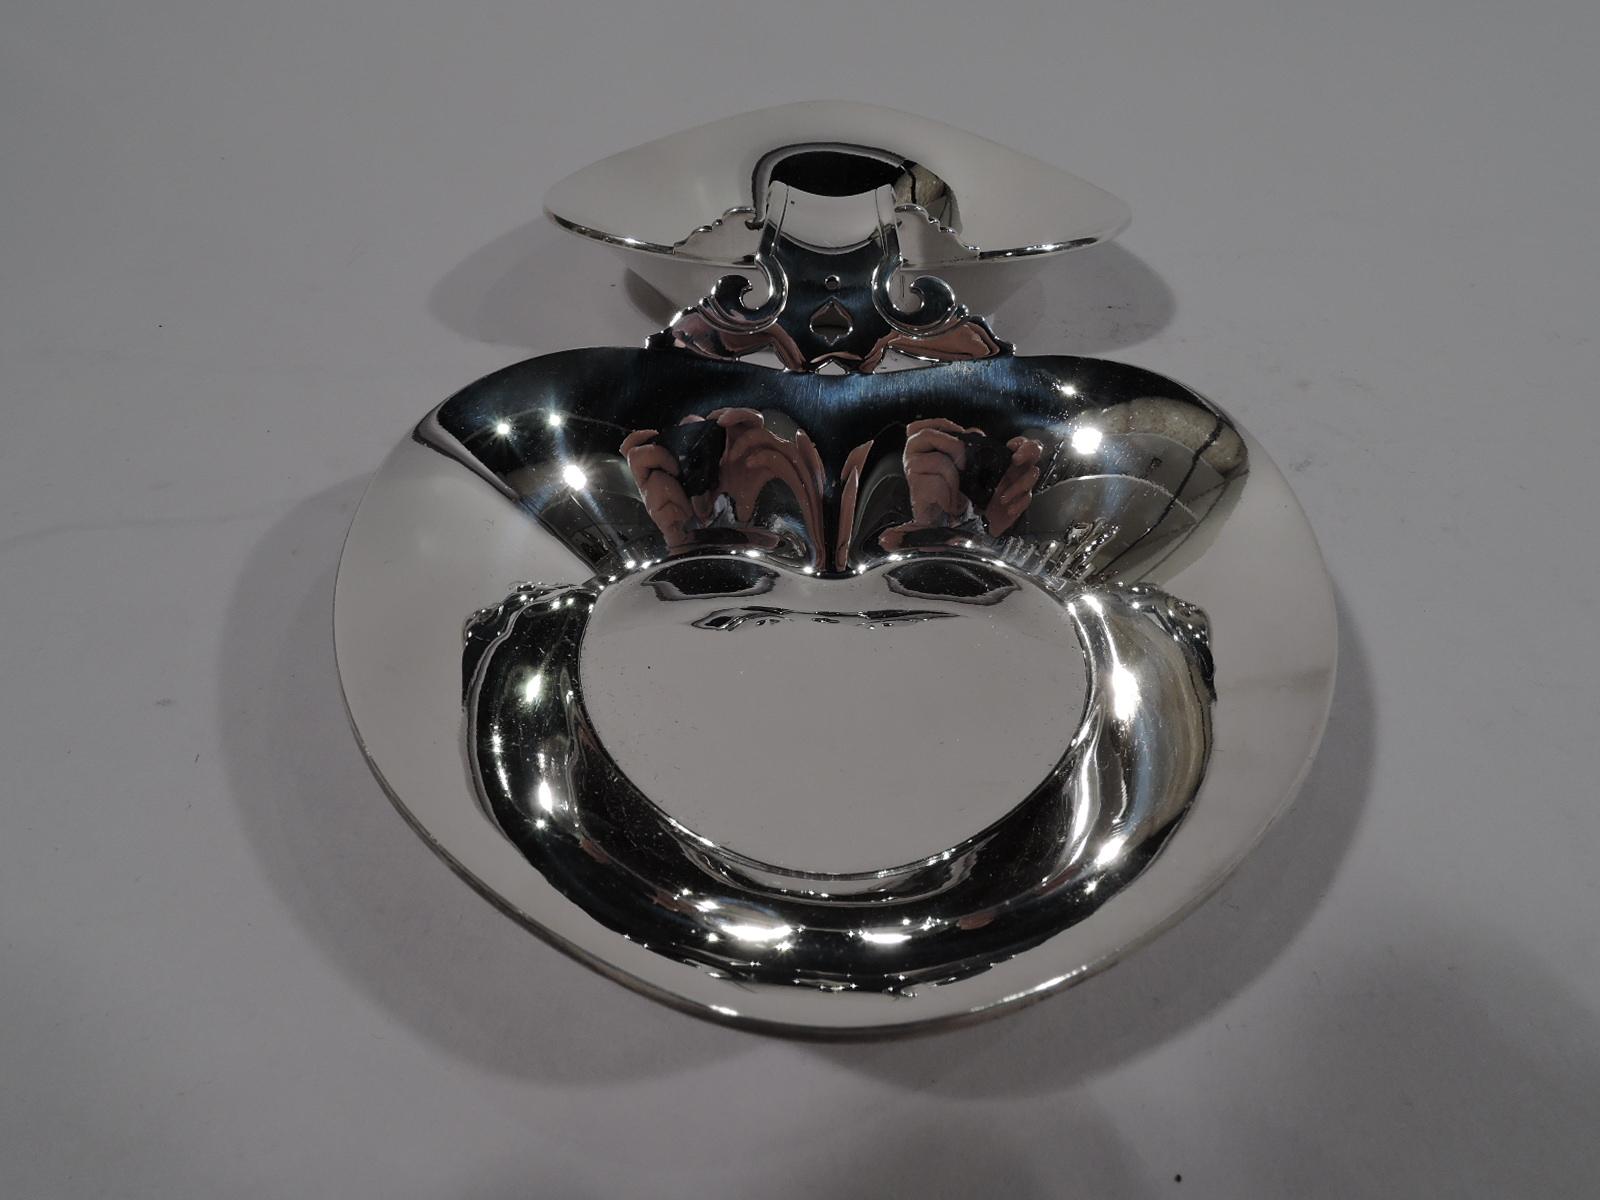 Art Deco sterling silver double bowl. Made by Tiffany & Co. in New York, circa 1910. Two separate hearts joined by a narrow bridge. The perfect valentine’s day gift for the modern romantic. Fully marked including pattern no. 17796A (first produced